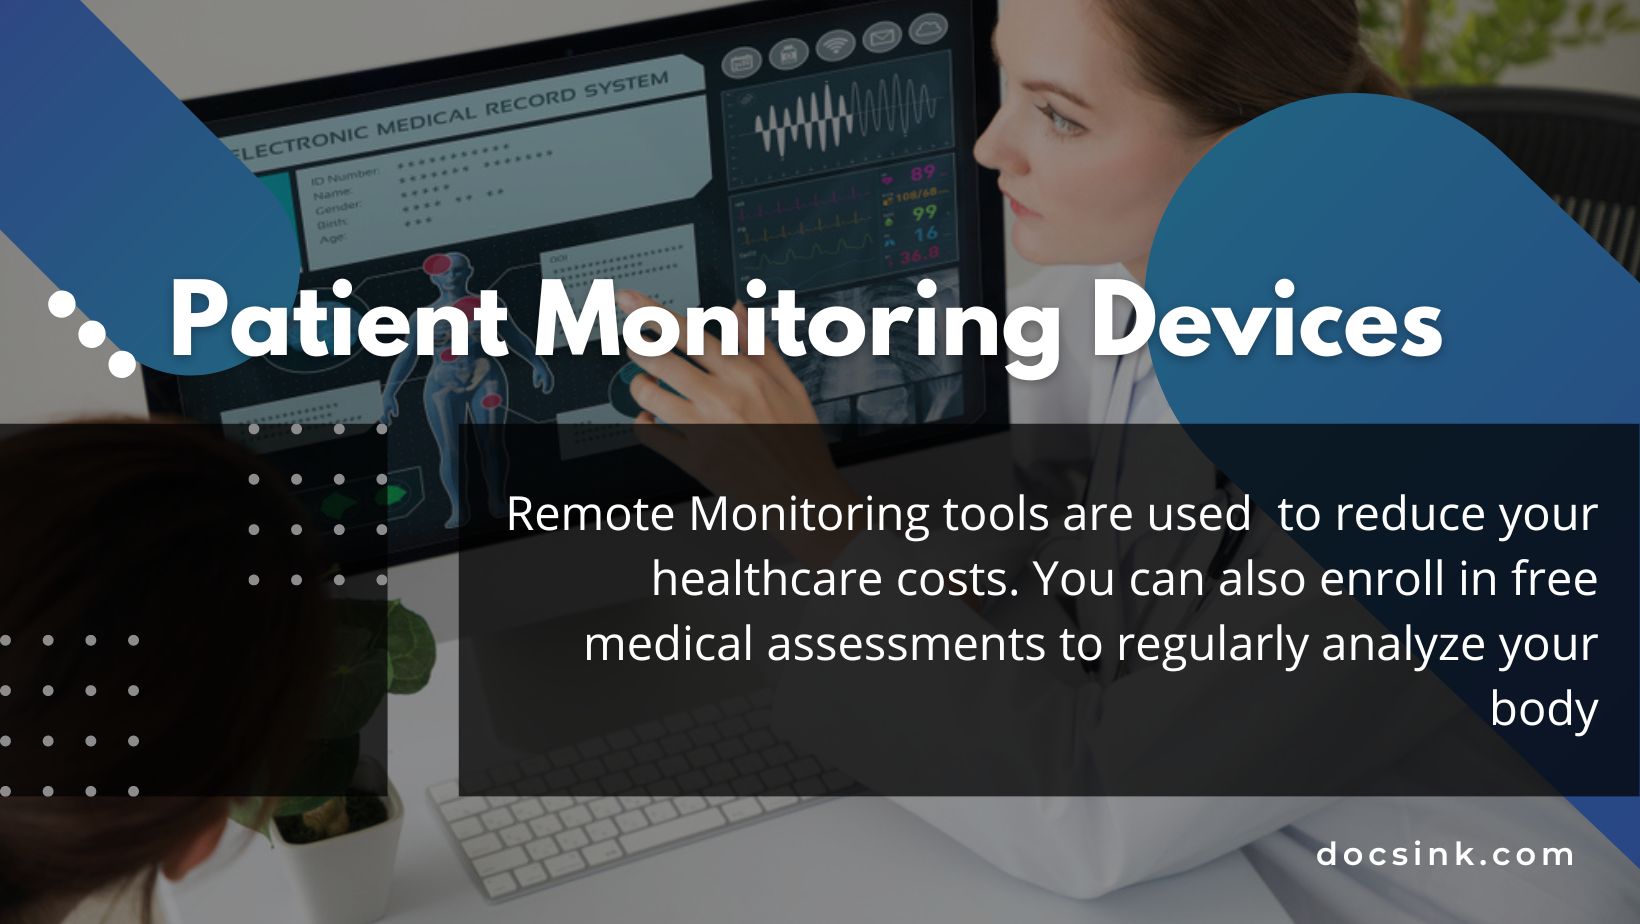 Quality Healthcare with Advanced Patient Monitoring Devices